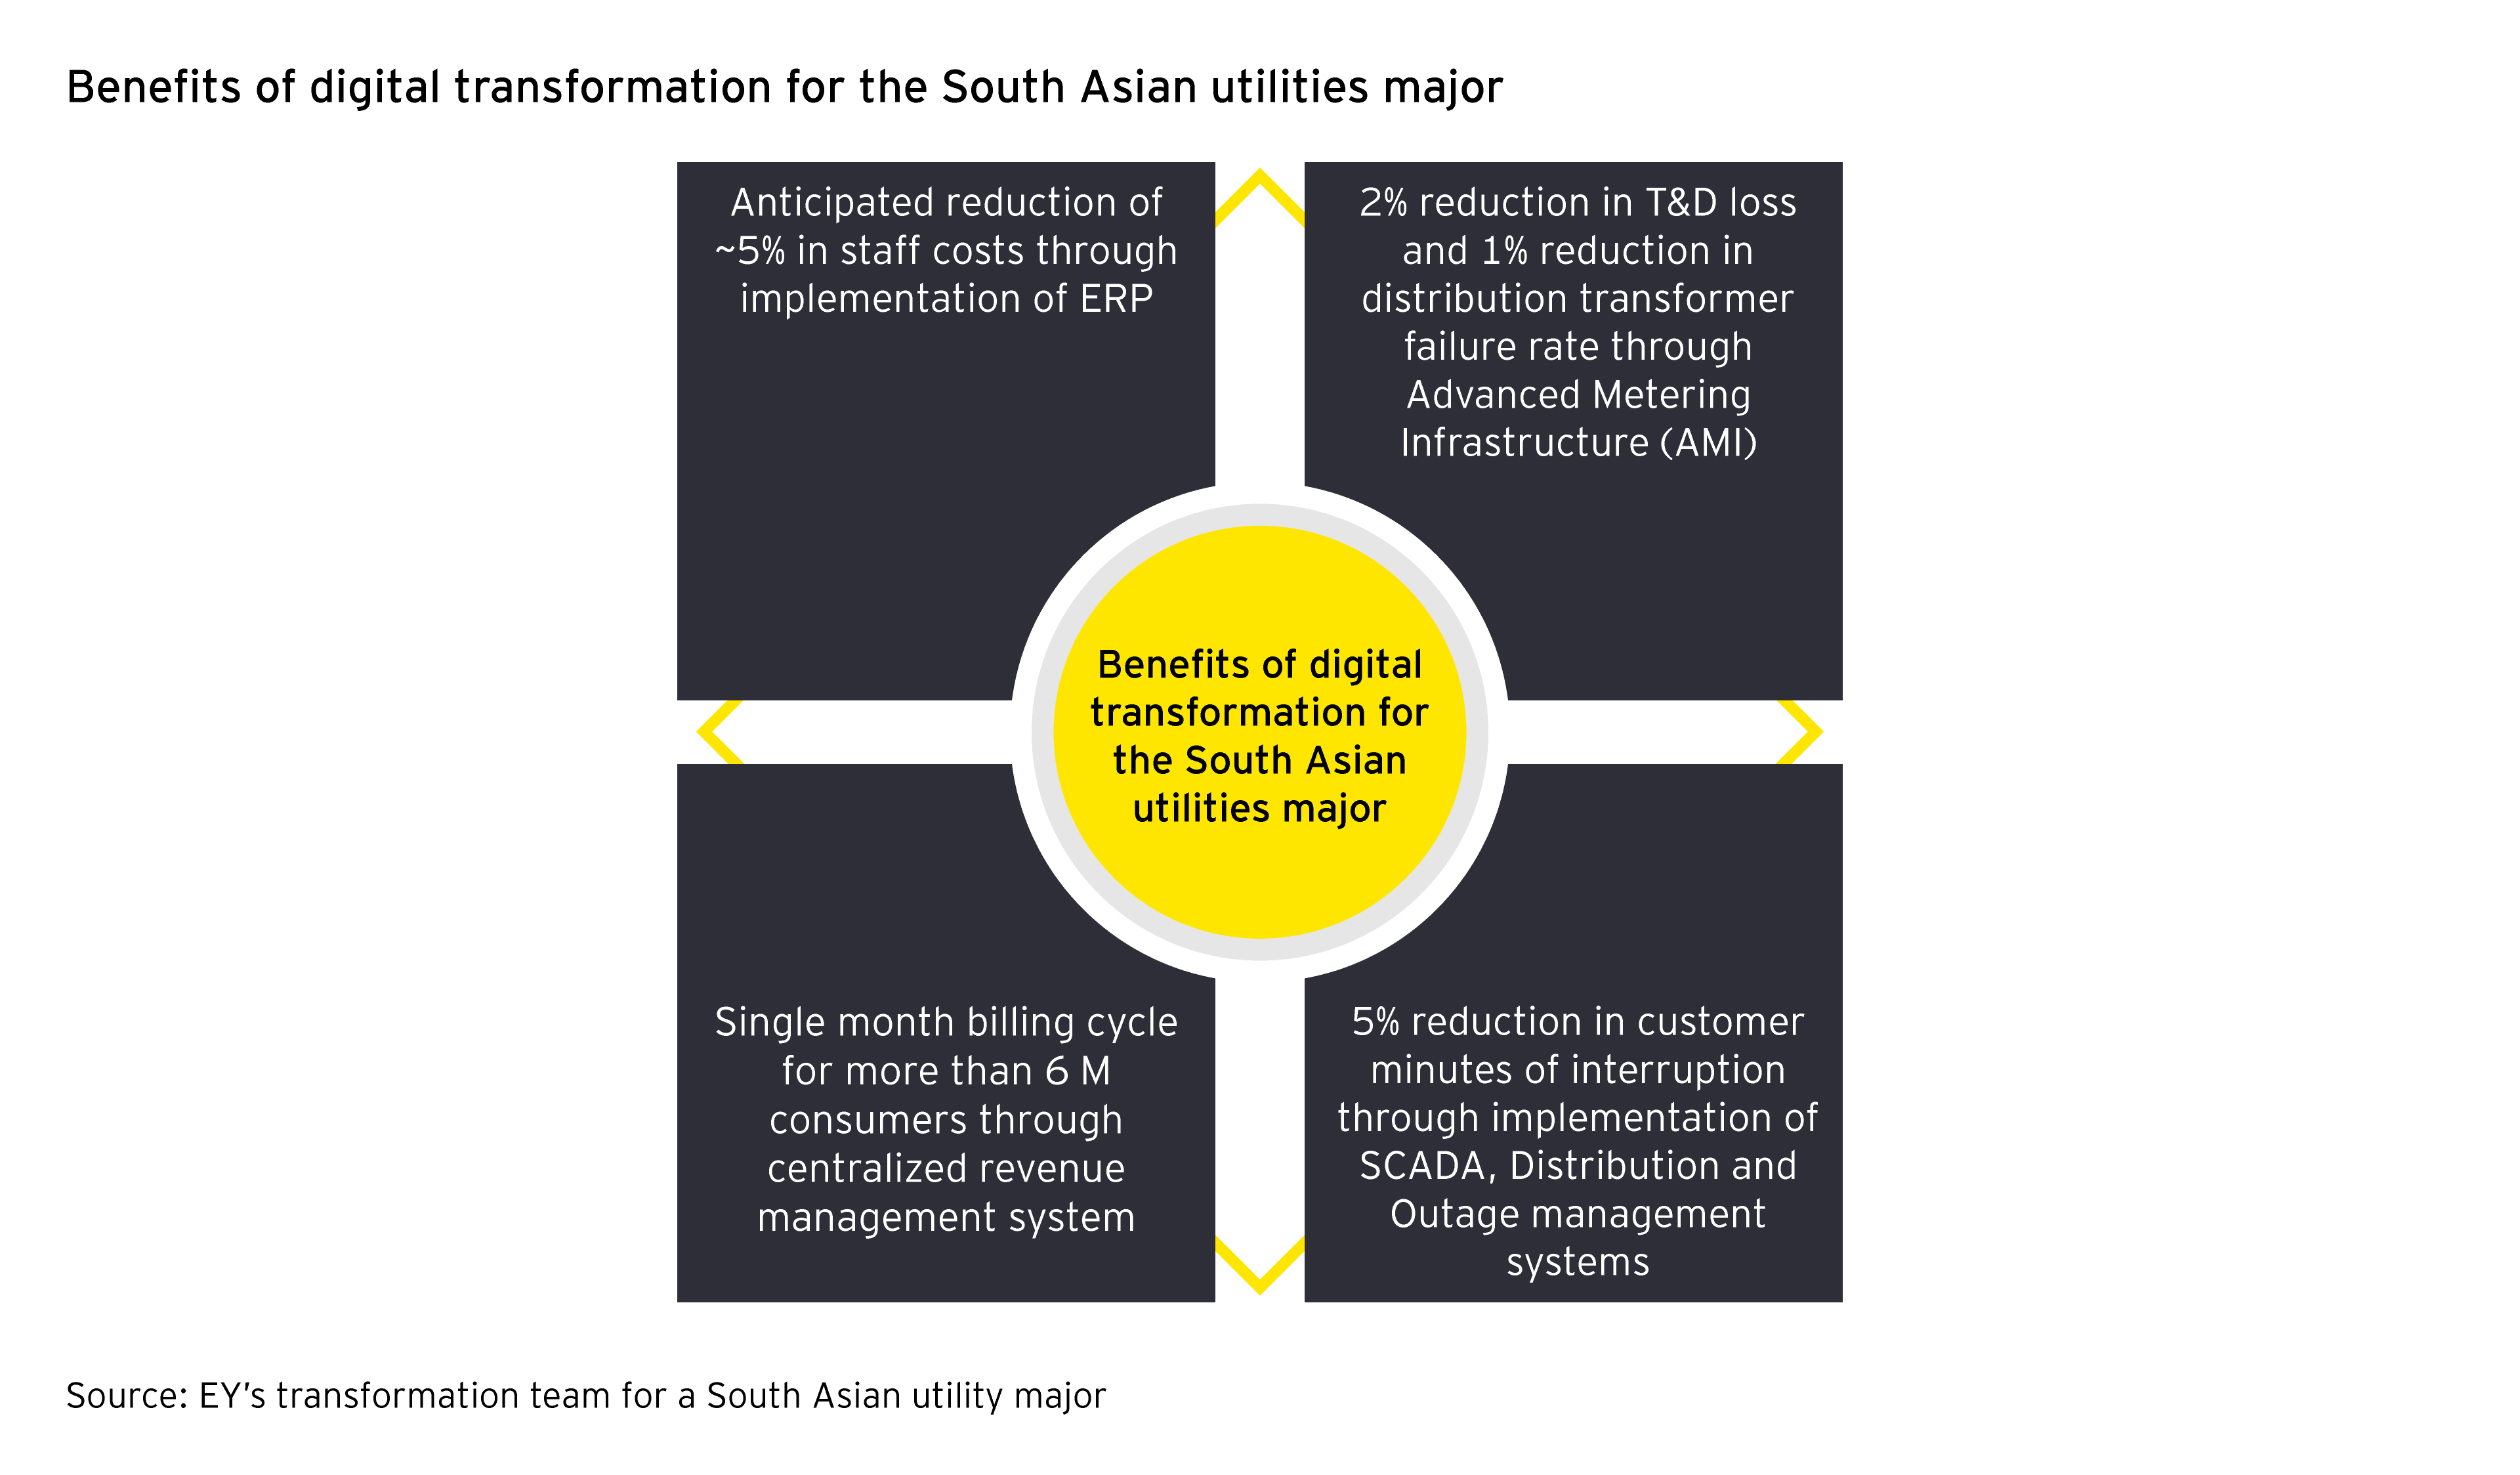 Benefits of digital transformation for a South Asian utilities major